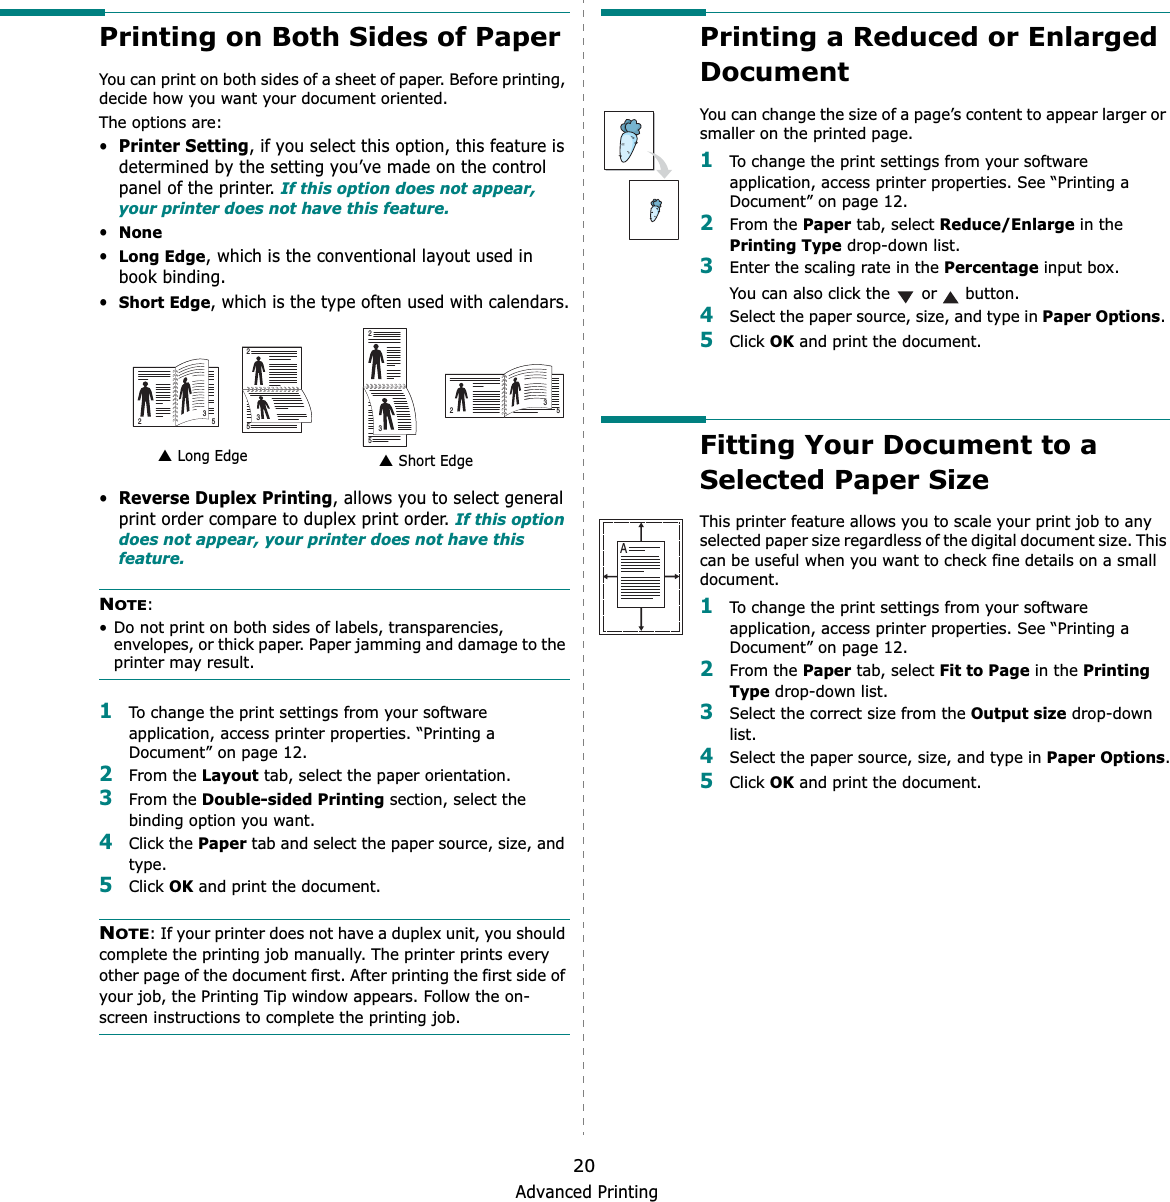 Advanced Printing20Printing on Both Sides of PaperYou can print on both sides of a sheet of paper. Before printing, decide how you want your document oriented.The options are:•Printer Setting, if you select this option, this feature is determined by the setting you’ve made on the control panel of the printer. If this option does not appear, your printer does not have this feature.•None•Long Edge, which is the conventional layout used in book binding.•Short Edge, which is the type often used with calendars.•Reverse Duplex Printing, allows you to select general print order compare to duplex print order. If this option does not appear, your printer does not have this feature.NOTE:• Do not print on both sides of labels, transparencies, envelopes, or thick paper. Paper jamming and damage to the printer may result. 1To change the print settings from your software application, access printer properties. “Printing a Document” on page 12.2From the Layout tab, select the paper orientation.3From the Double-sided Printing section, select the binding option you want.     4Click the Paper tab and select the paper source, size, and type.5Click OK and print the document.NOTE: If your printer does not have a duplex unit, you should complete the printing job manually. The printer prints every other page of the document first. After printing the first side of your job, the Printing Tip window appears. Follow the on-screen instructions to complete the printing job. Long Edge▲ Short Edge▲253253253253Printing a Reduced or Enlarged DocumentYou can change the size of a page’s content to appear larger or smaller on the printed page. 1To change the print settings from your software application, access printer properties. See “Printing a Document” on page 12. 2From the Paper tab, select Reduce/Enlarge in the Printing Type drop-down list. 3Enter the scaling rate in the Percentage input box.You can also click the   or   button.4Select the paper source, size, and type in Paper Options.5Click OK and print the document. Fitting Your Document to a Selected Paper SizeThis printer feature allows you to scale your print job to any selected paper size regardless of the digital document size. This can be useful when you want to check fine details on a small document. 1To change the print settings from your software application, access printer properties. See “Printing a Document” on page 12.2From the Paper tab, select Fit to Page in the Printing Type drop-down list. 3Select the correct size from the Output size drop-down list.4Select the paper source, size, and type in Paper Options.5Click OK and print the document.A